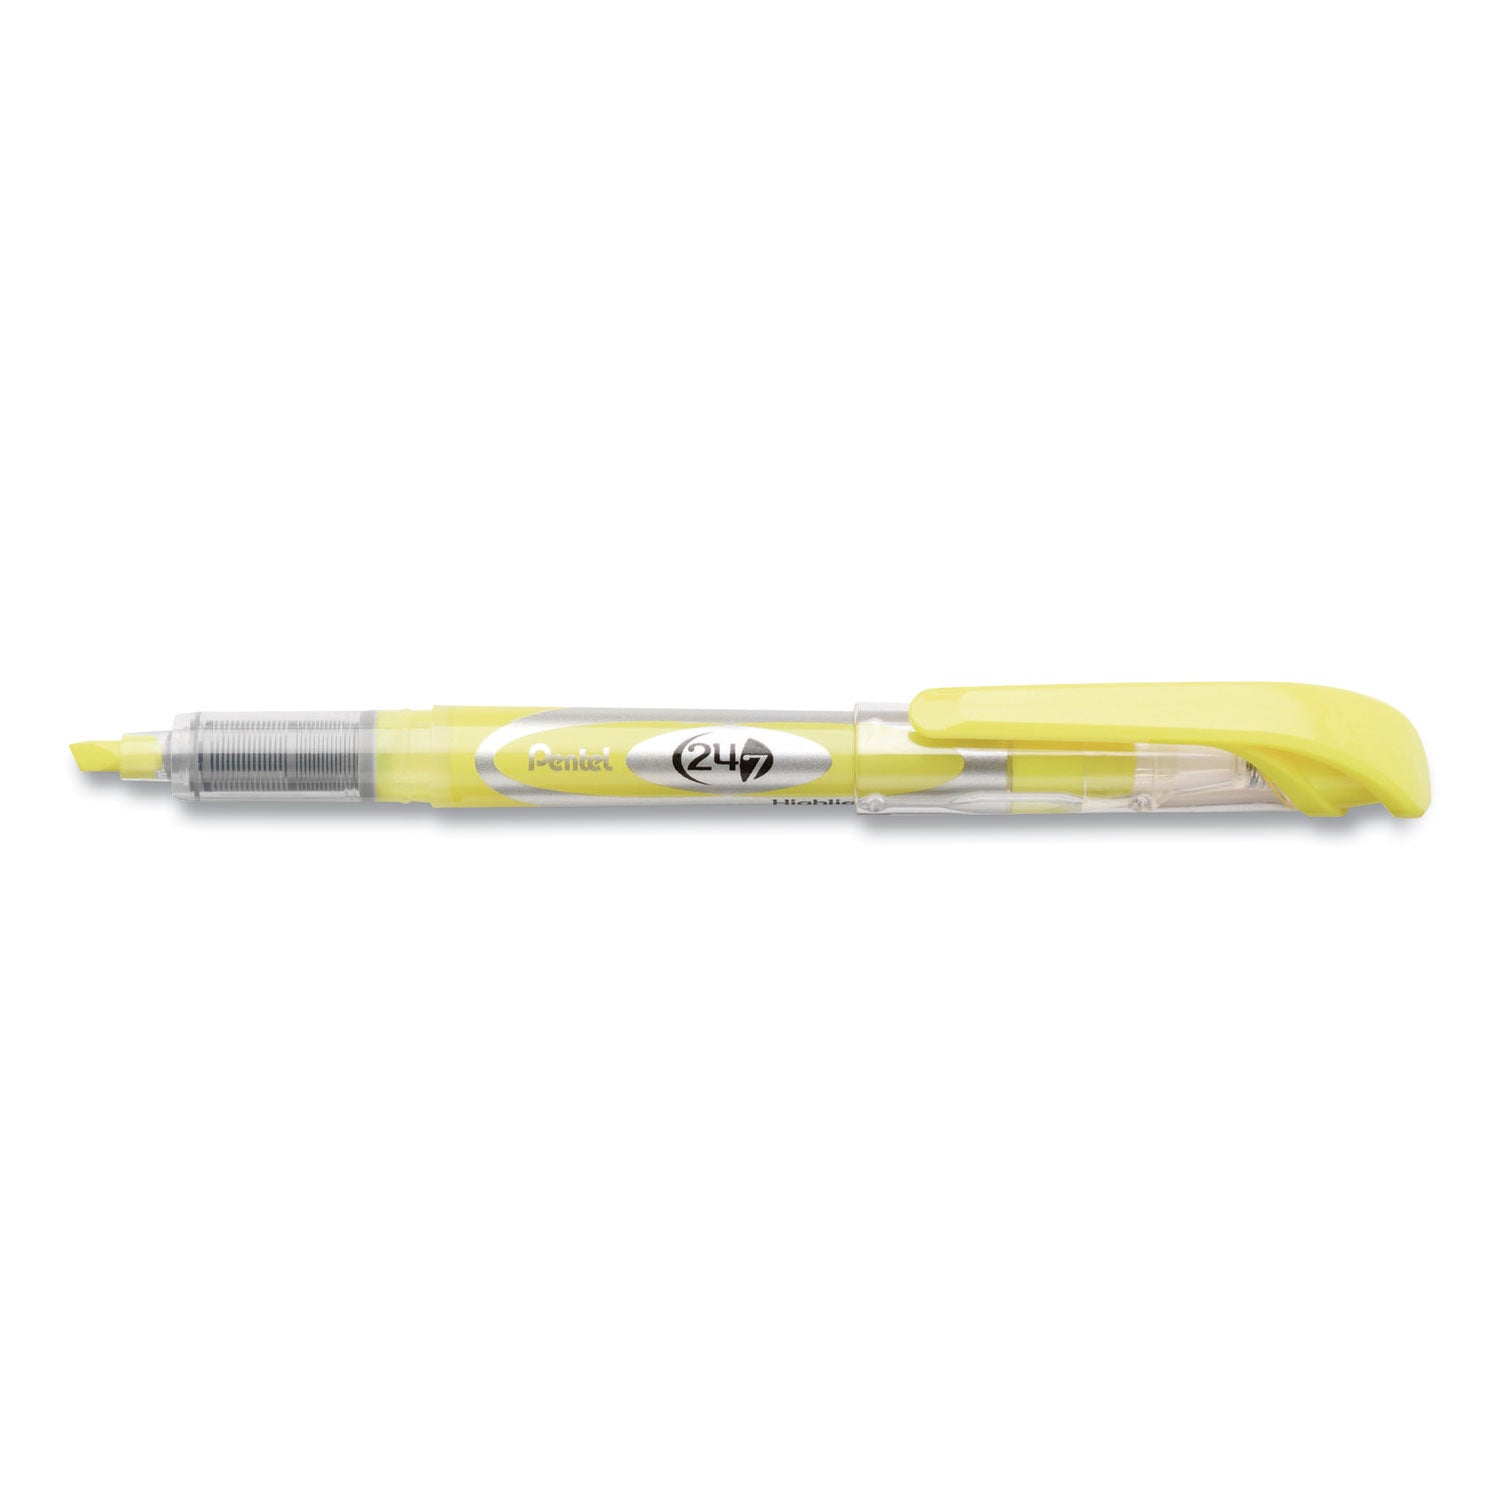 24/7 Highlighters, Bright Yellow Ink, Chisel Tip, Bright Yellow/Silver/Clear Barrel, Dozen - 